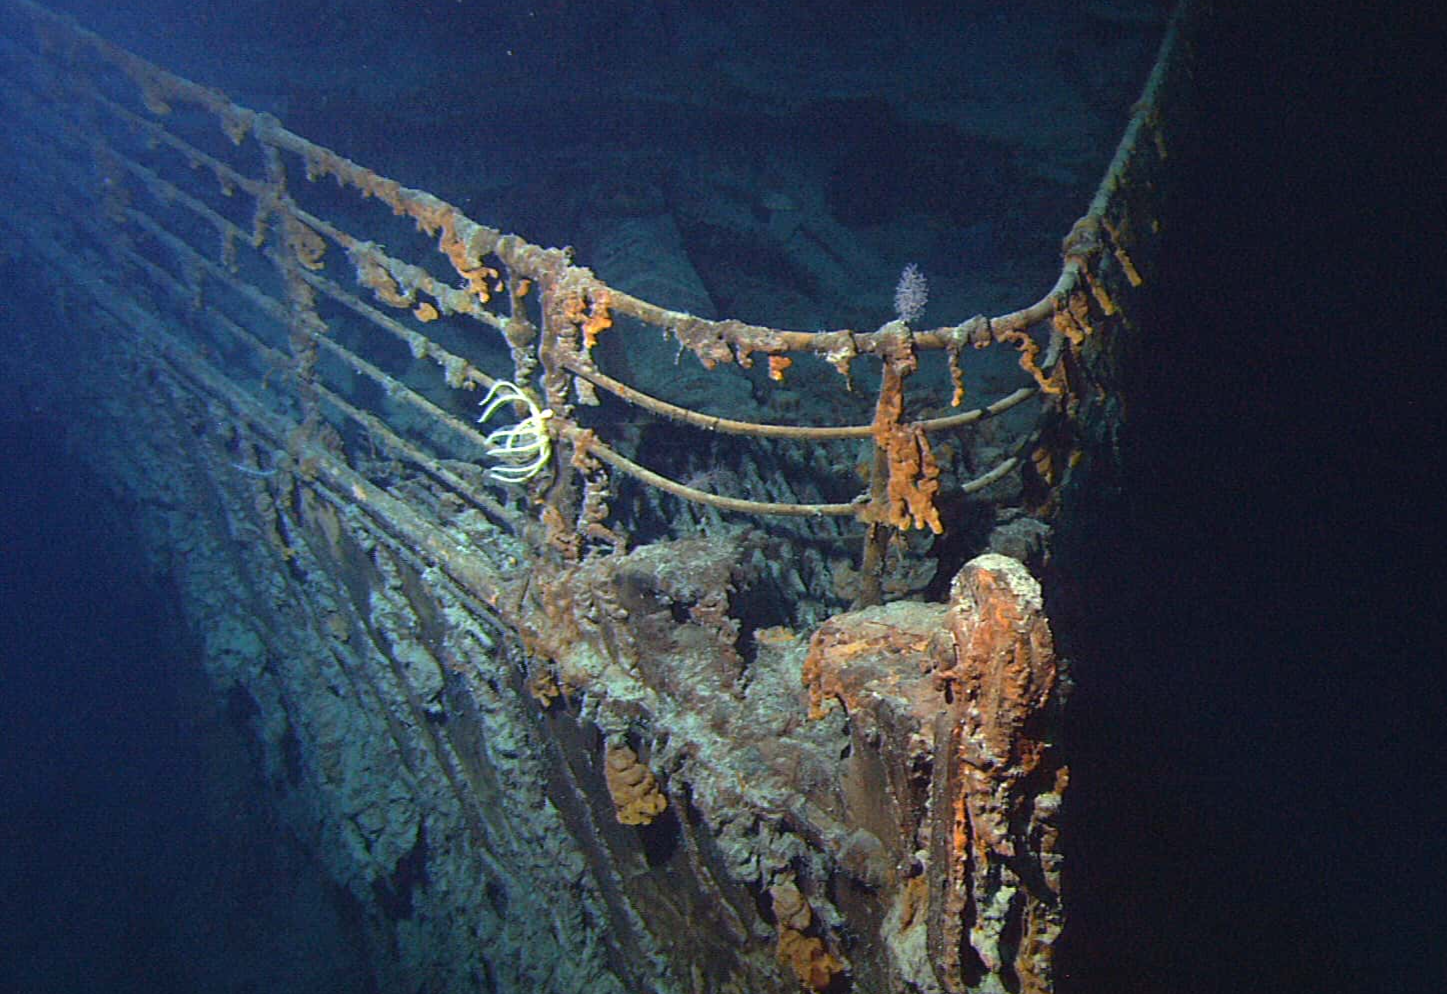 <p>Unfortunately, the Titanic was never recovered. A recovery of that magnitude would be extremely complex and even more costly than anyone could imagine.</p>  <p>Even still, some extremely valuable artifacts (ie. artwork worth millions) will remain forever on the sea floor.</p>